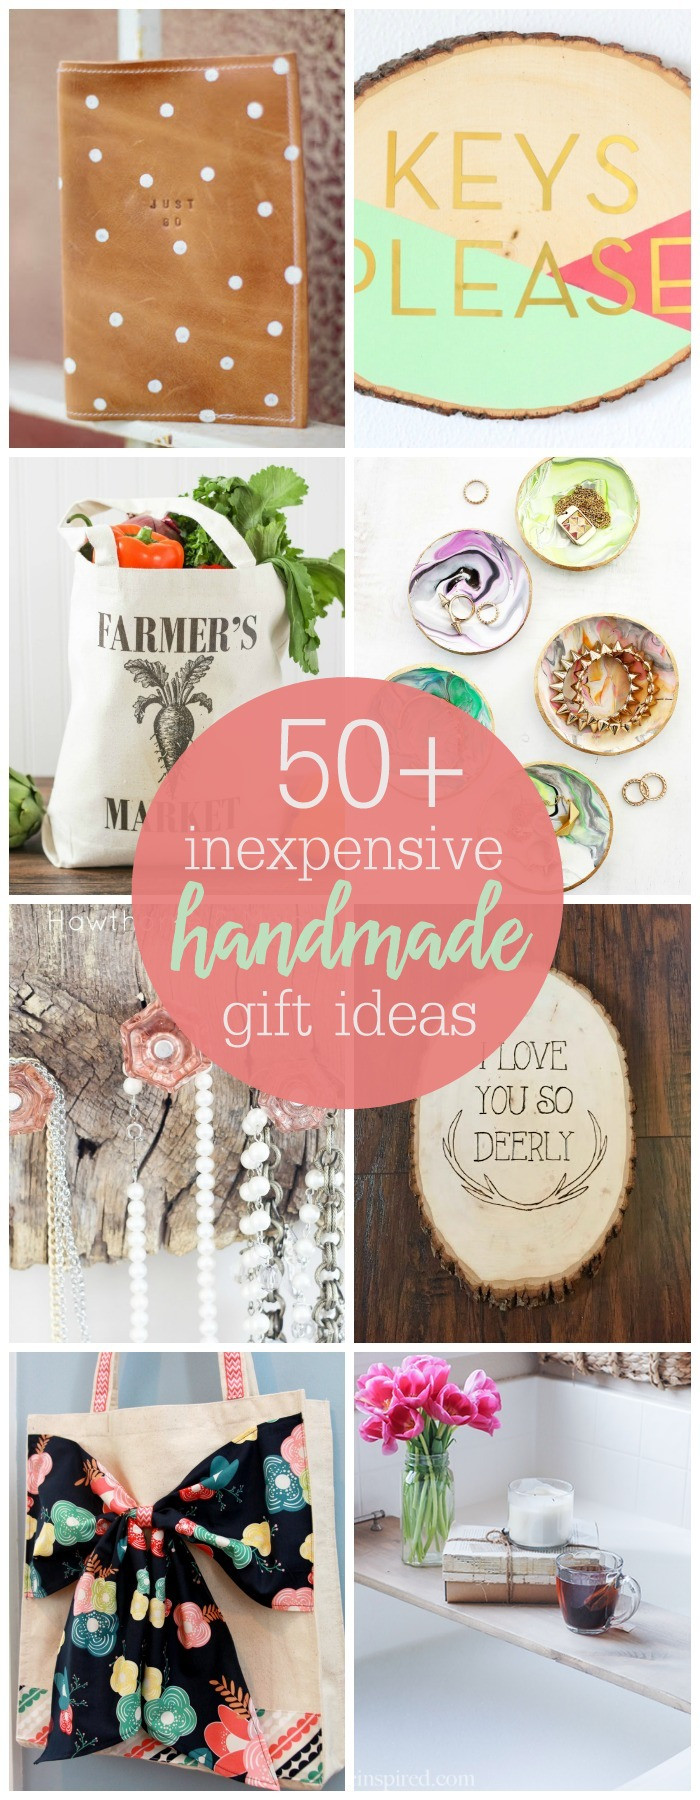 DIY Gifts For Best Friends
 Inexpensive Handmade Gift Ideas